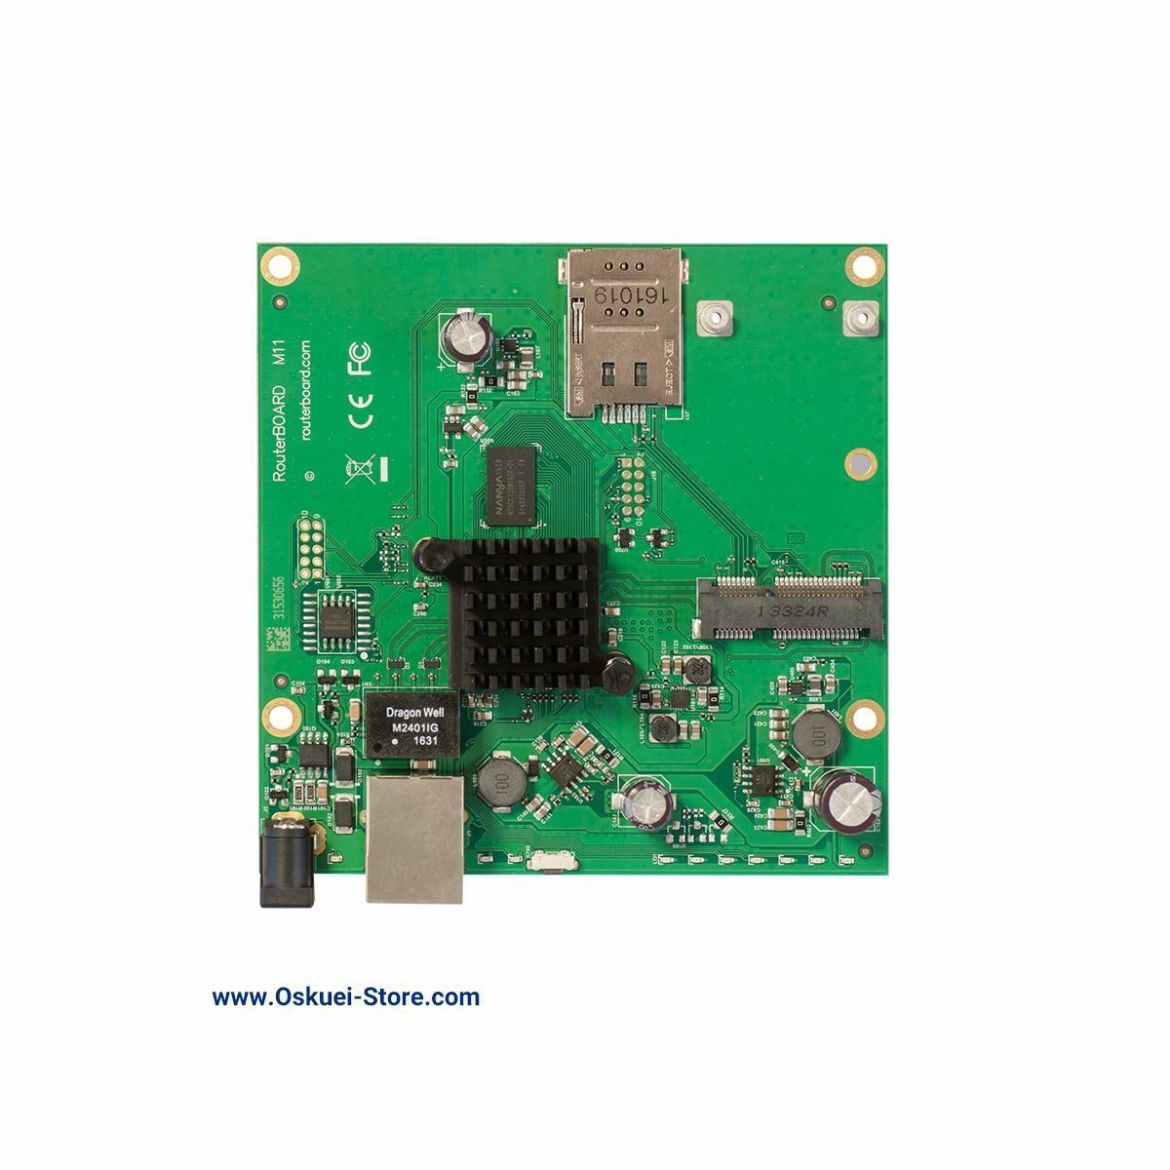 MikroTik RBM11G Router Board Front